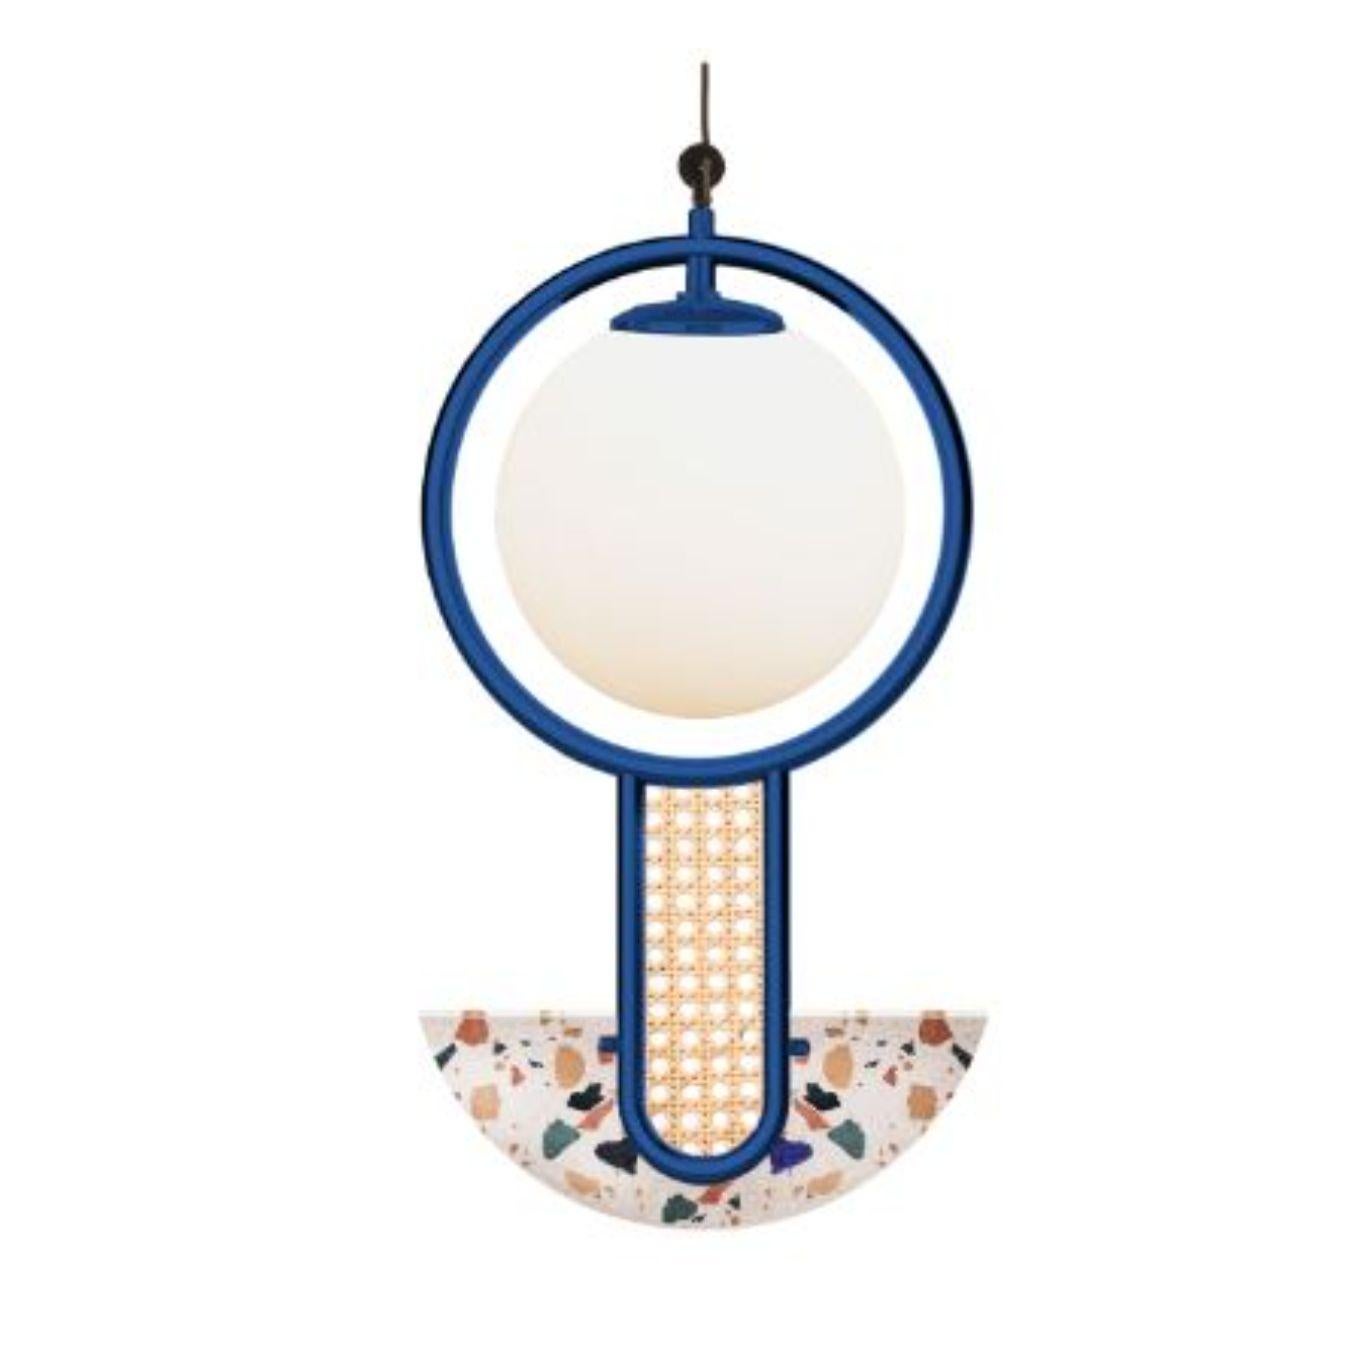 Frame II Circular Suspension lamp by Dooq
Dimensions: W 28 x D 18 x H 50 cm
Materials: lacquered metal, rattan, terrazzo.
Also available in different colors and dimensions. 

Information:
230V/50Hz
1 x max. G9
4W LED

120V/60Hz
1 x max.